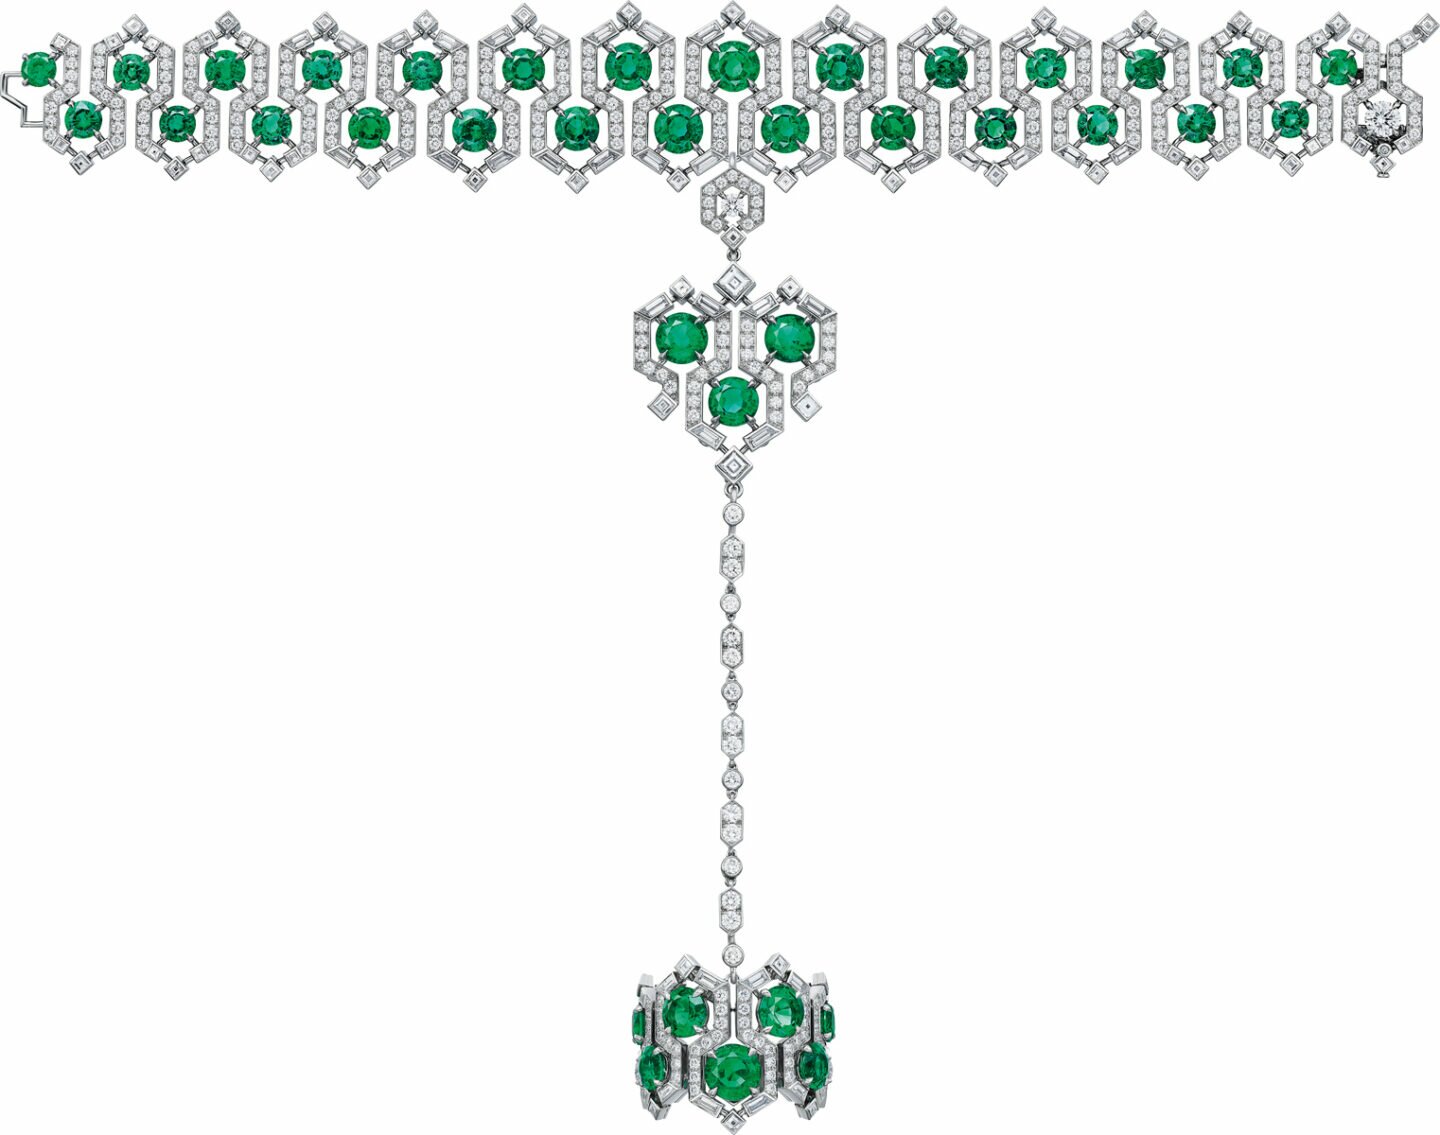 Cartier’s Kheon Hair Ornament Shows Its Expertise In Modular Jewellery